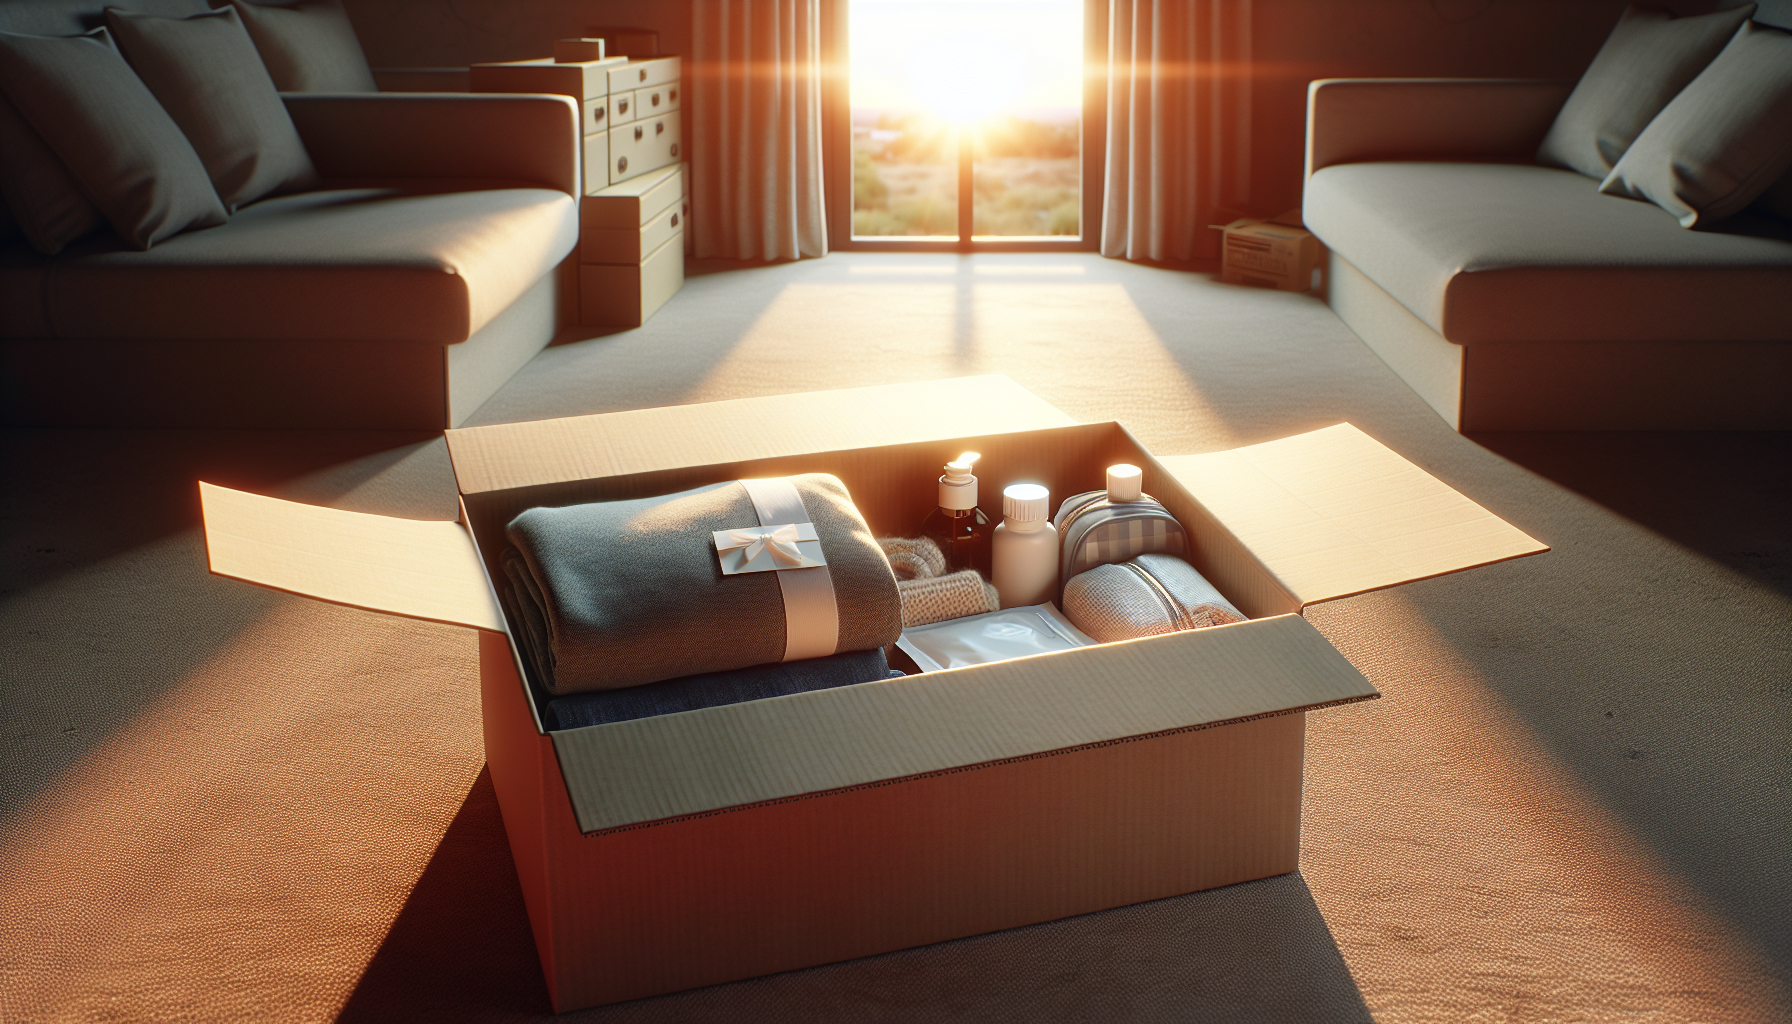 First night essentials box for a comfortable transition to a new home